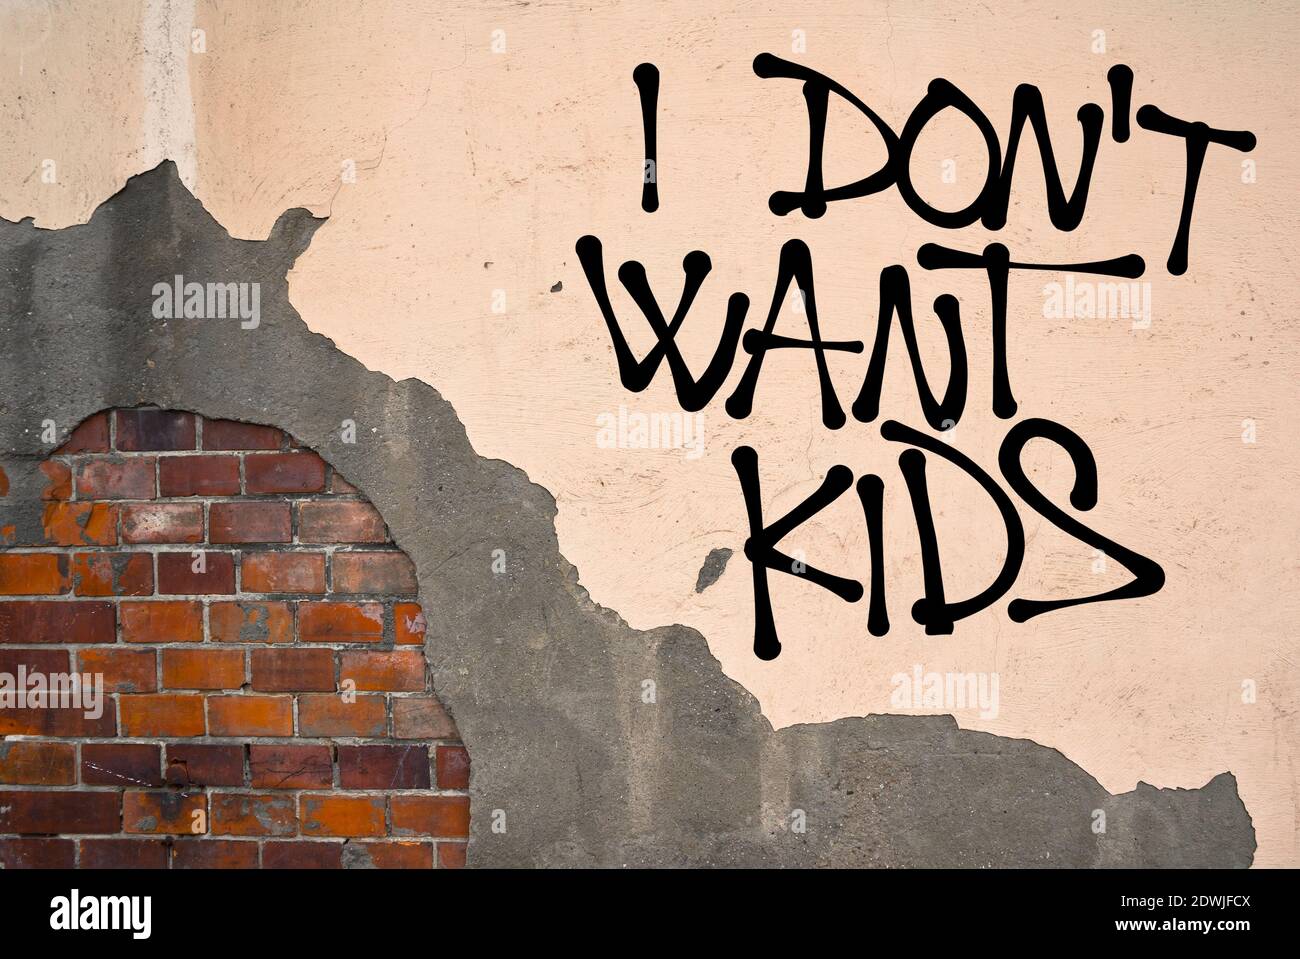 I Don't Want Kids - handwritten graffiti sprayed on the wall, anarchist aesthetics - voluntary decision to be childless. Refusal of parenthood, matern Stock Photo